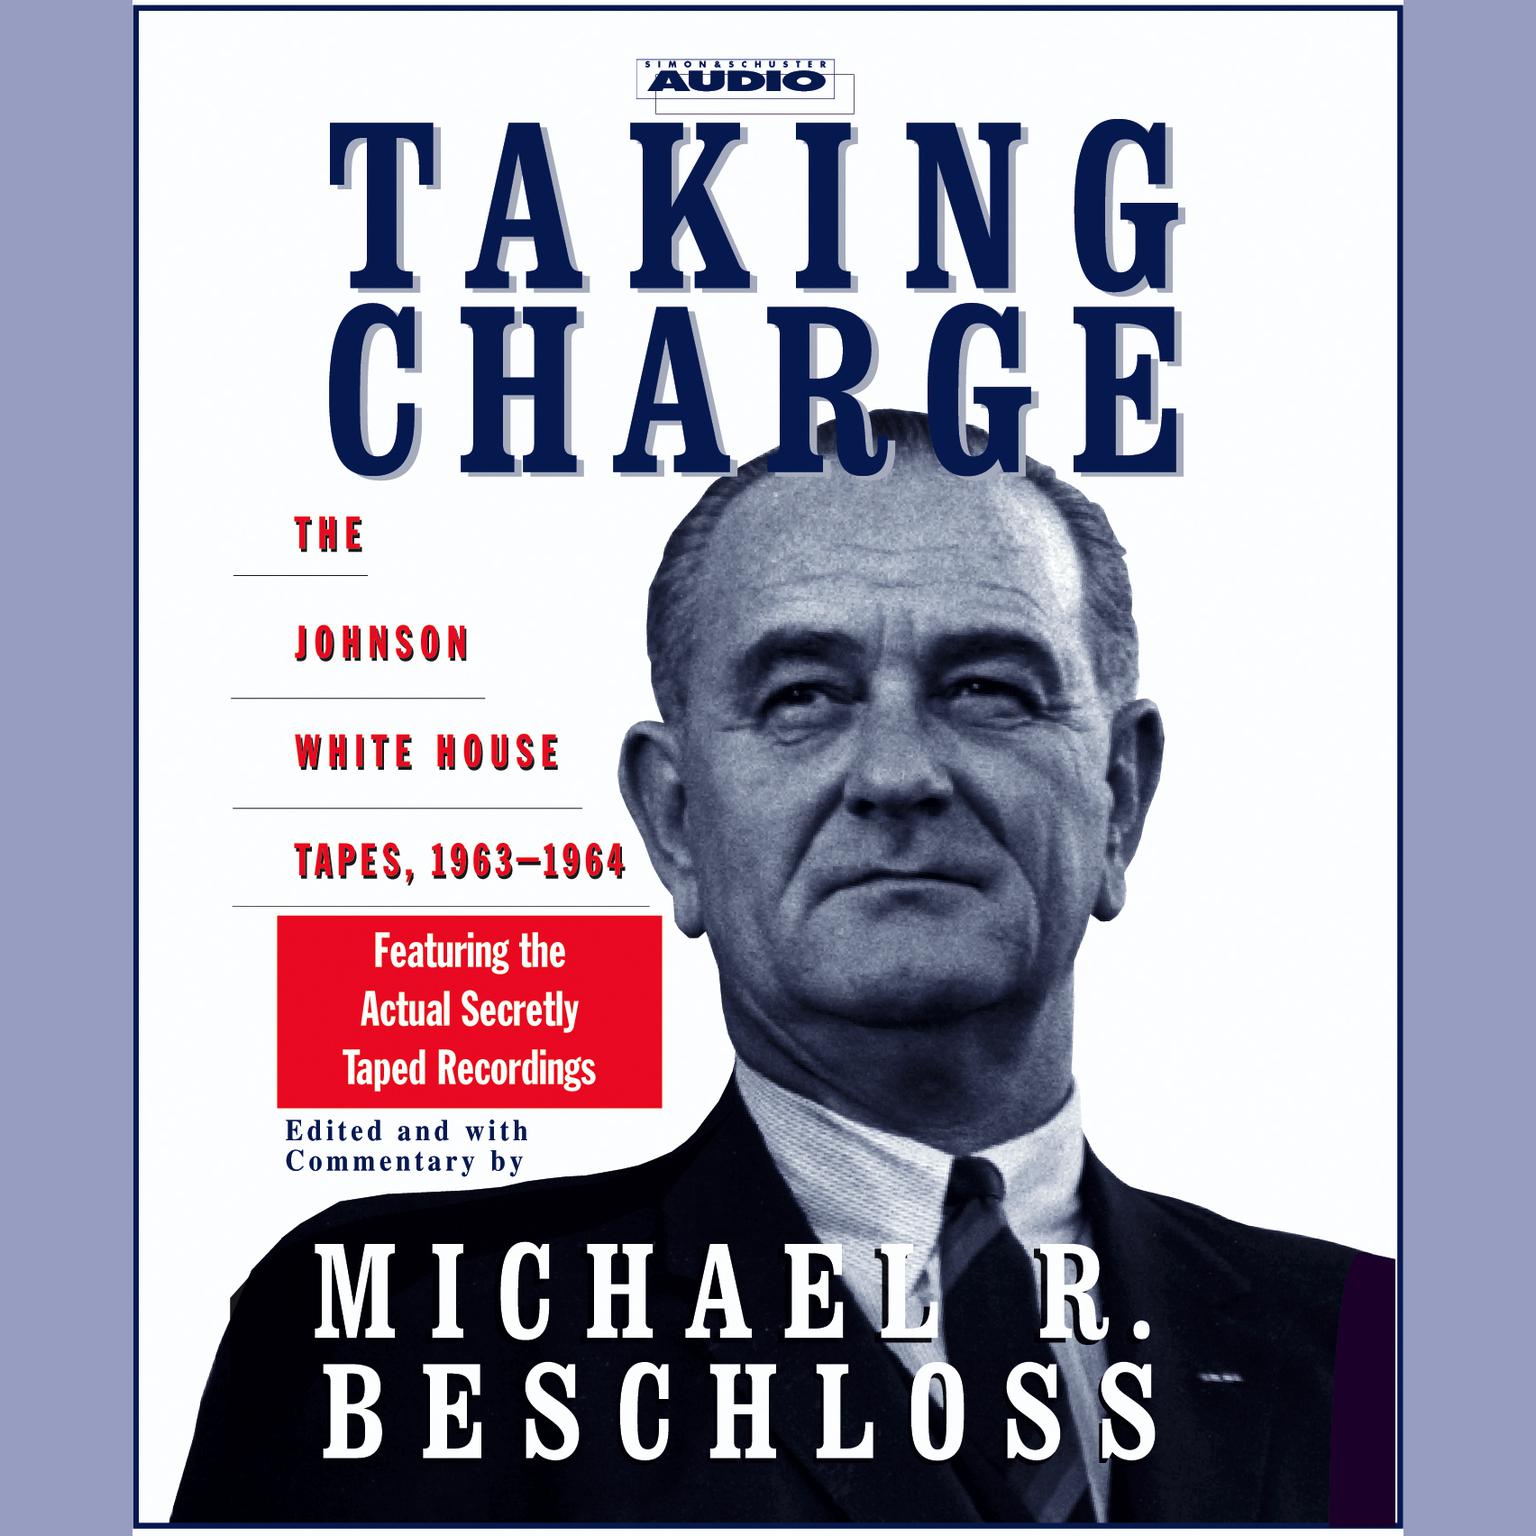 Taking Charge (Abridged): The Johnson White House Tapes 1963–1964 Audiobook, by Michael R. Beschloss